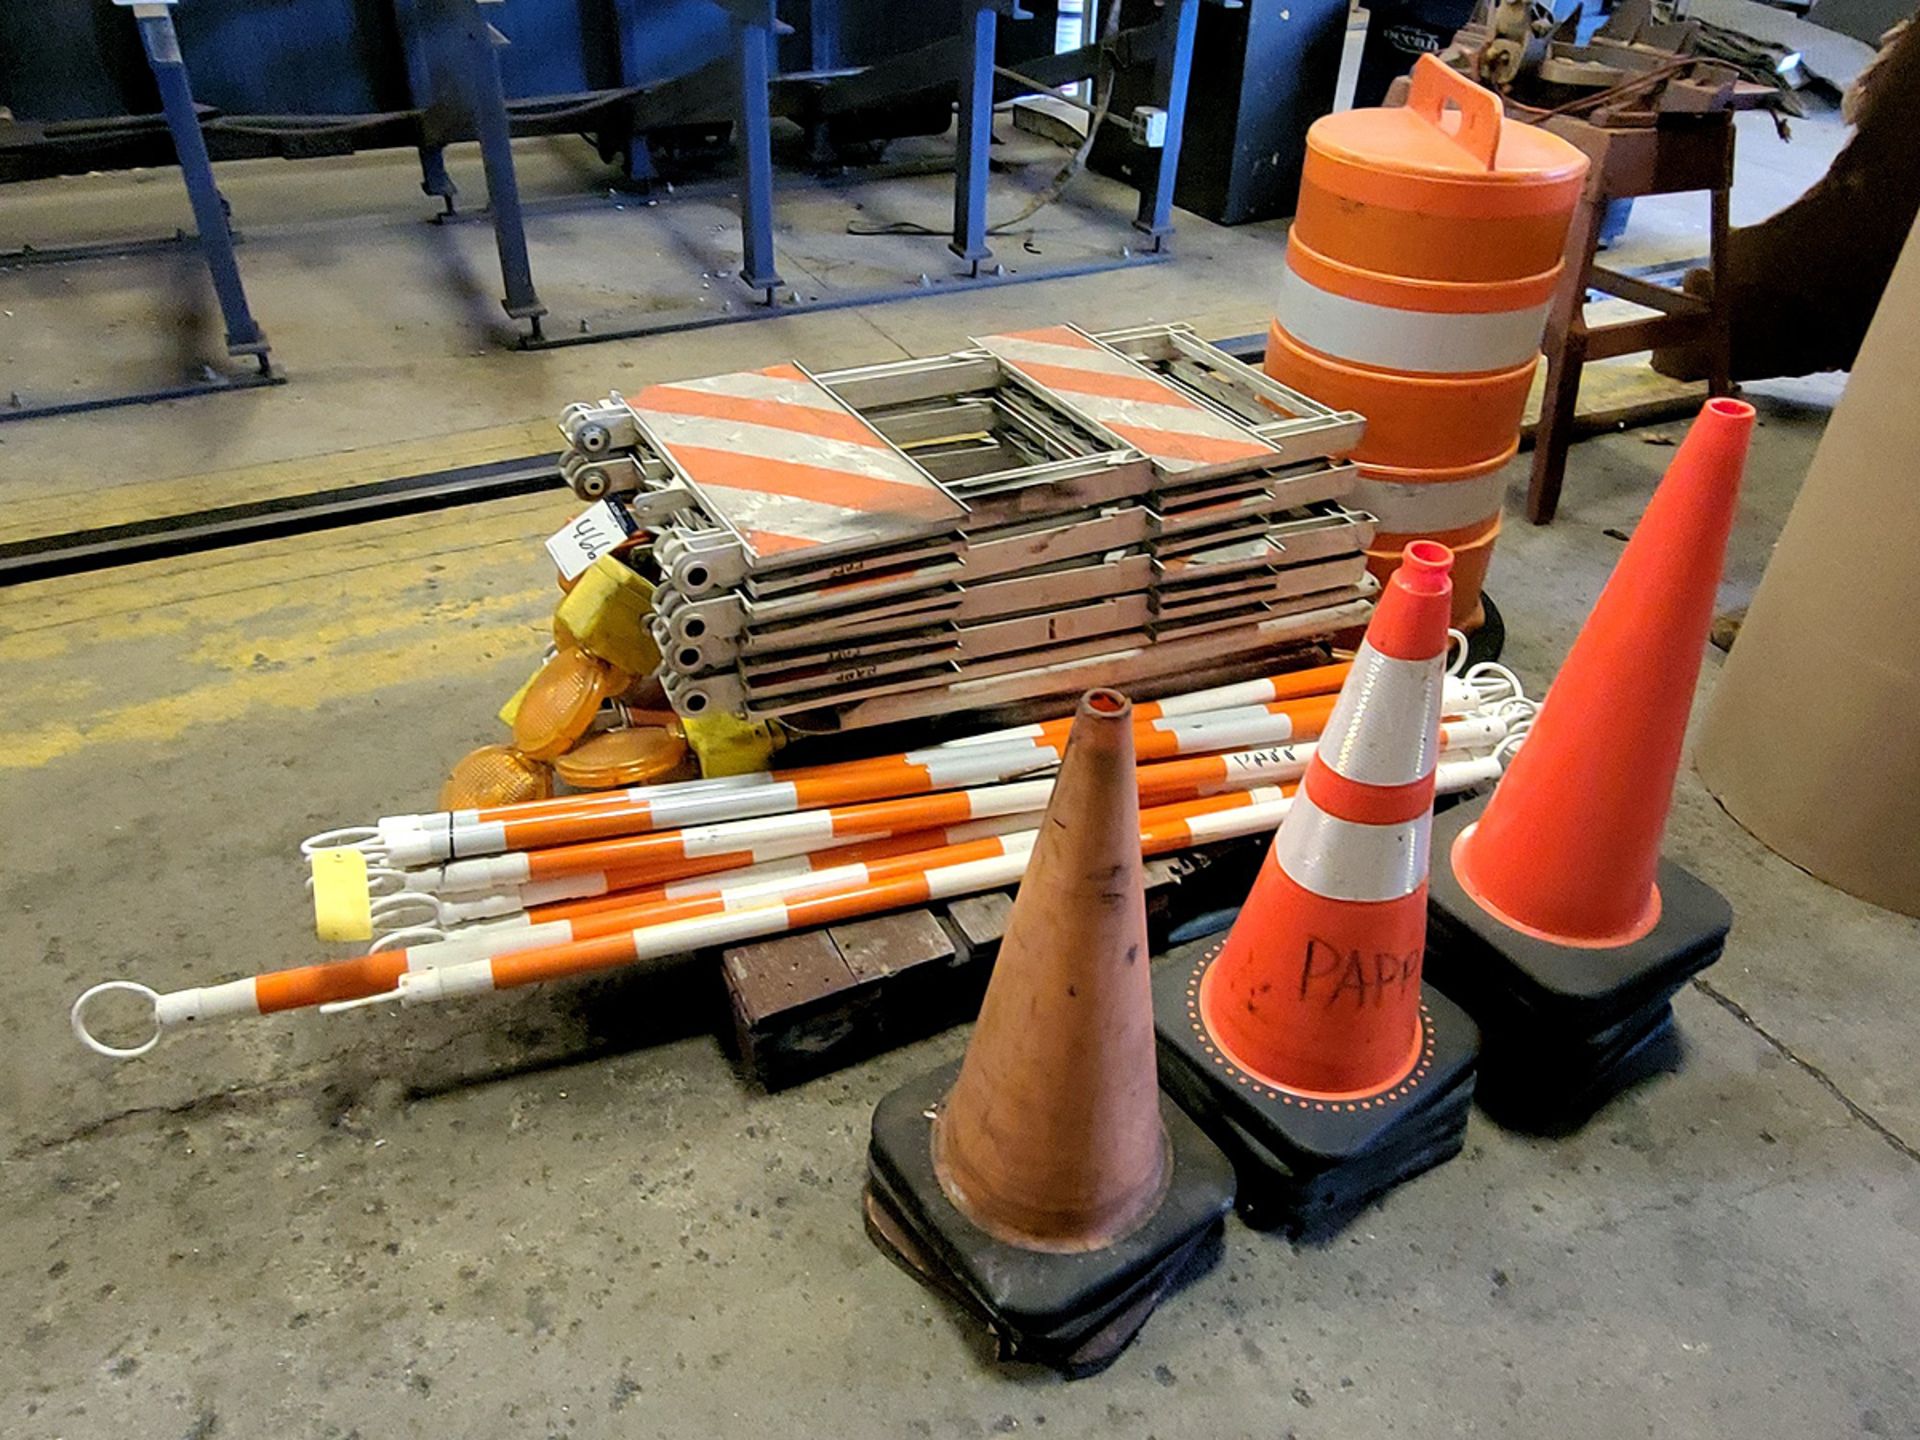 A Group of Safety Barriers Stands, Cones and Poles